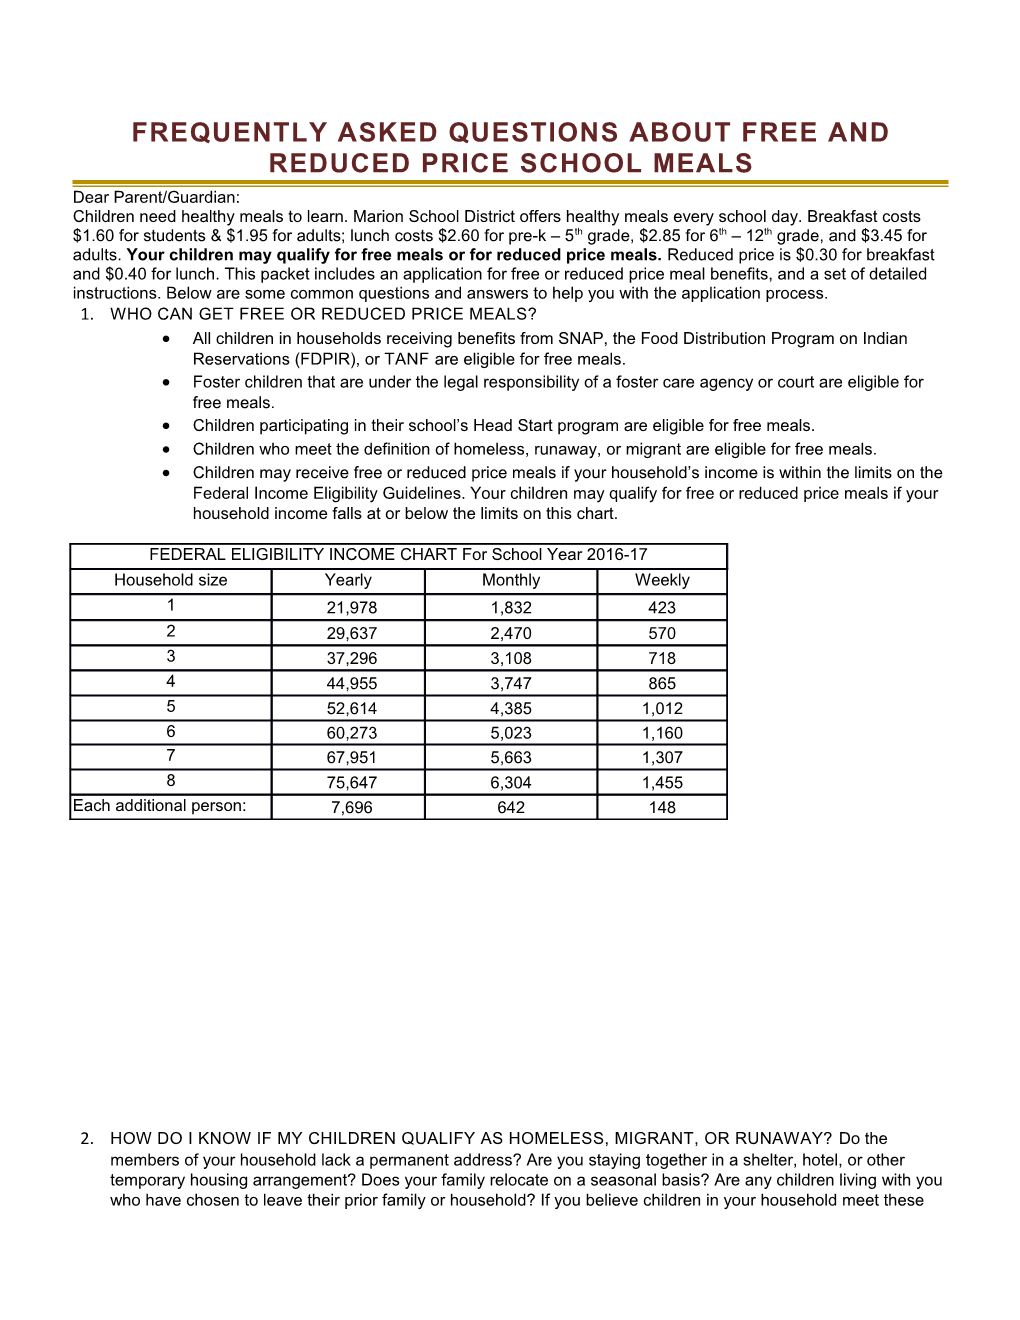 Frequently Asked Questions About Free and Reduced Price School Meals s1